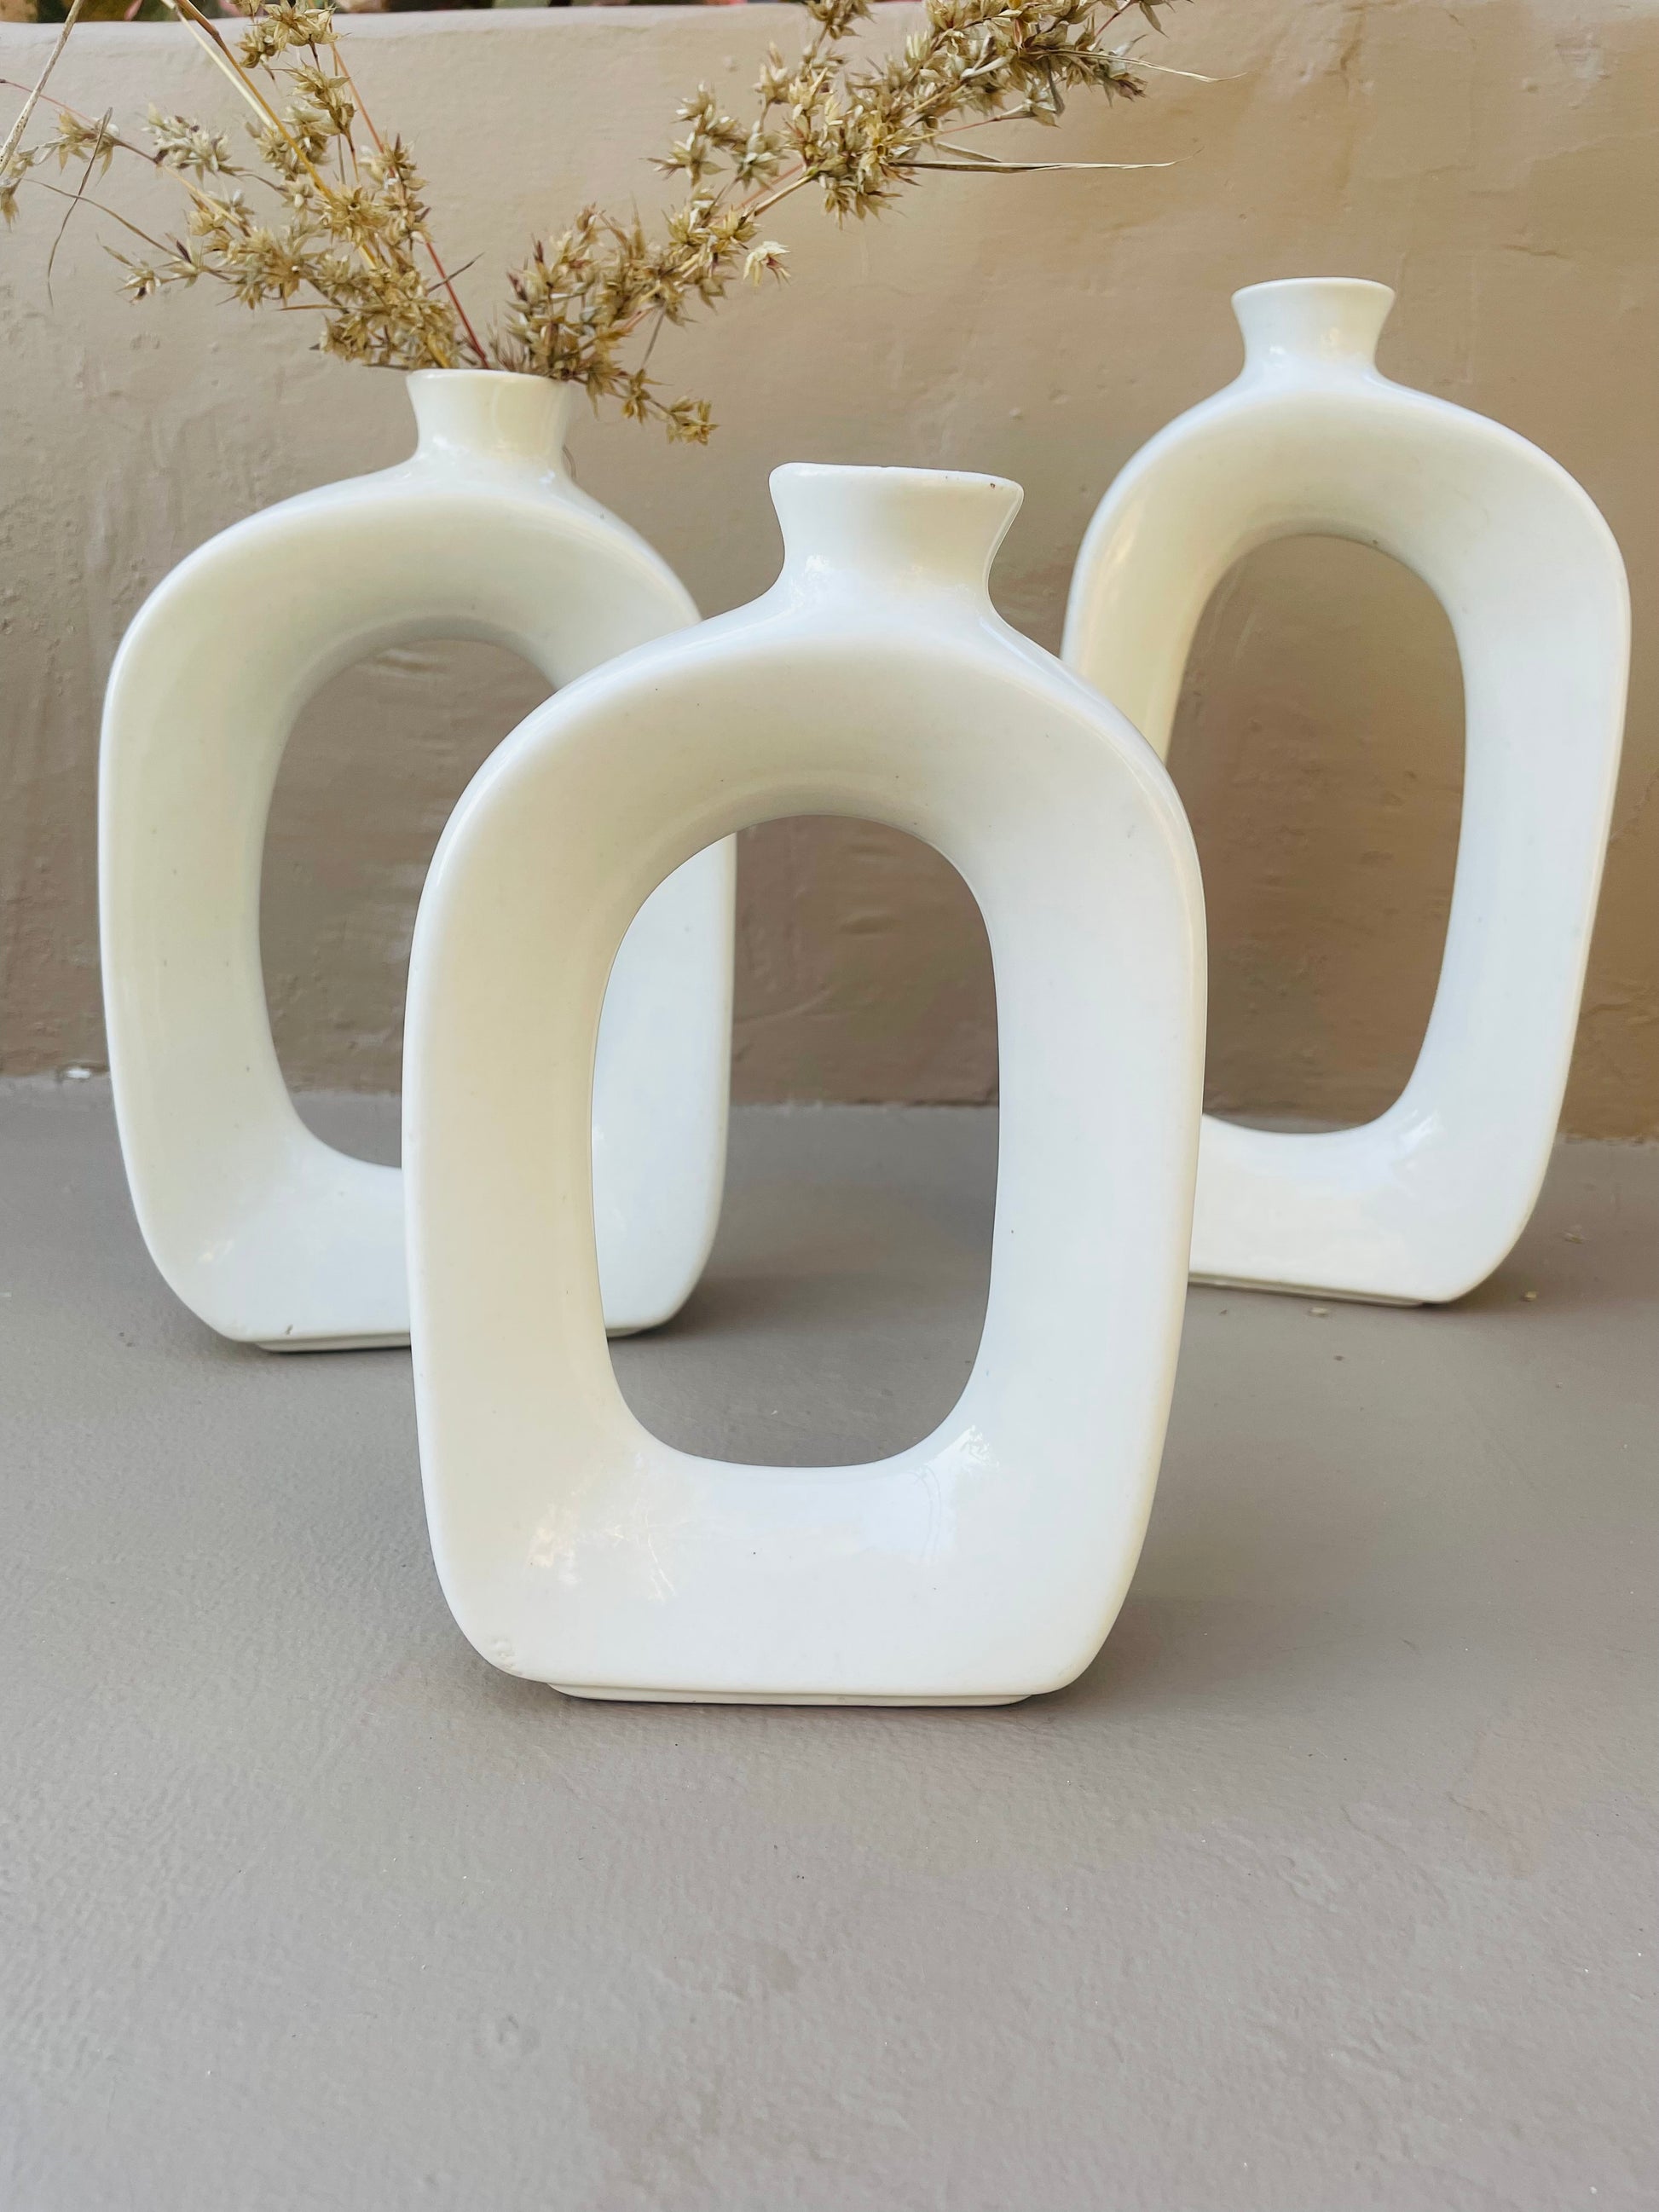  Abstract White Ceramic Vase, Classic White Color, Dry Flowers Display, Durable Vase, Elegant White Vase, Fresh Flowers Display, Gift Idea, High-Quality Ceramic, Housewarming Gift, Modern Décor, Room Decoration, Sleek Design, Sophisticated Design, Standalone Decor Piece, Touch of Elegance, Traditional Décor, Versatile Décor, Wedding Gift, tesu